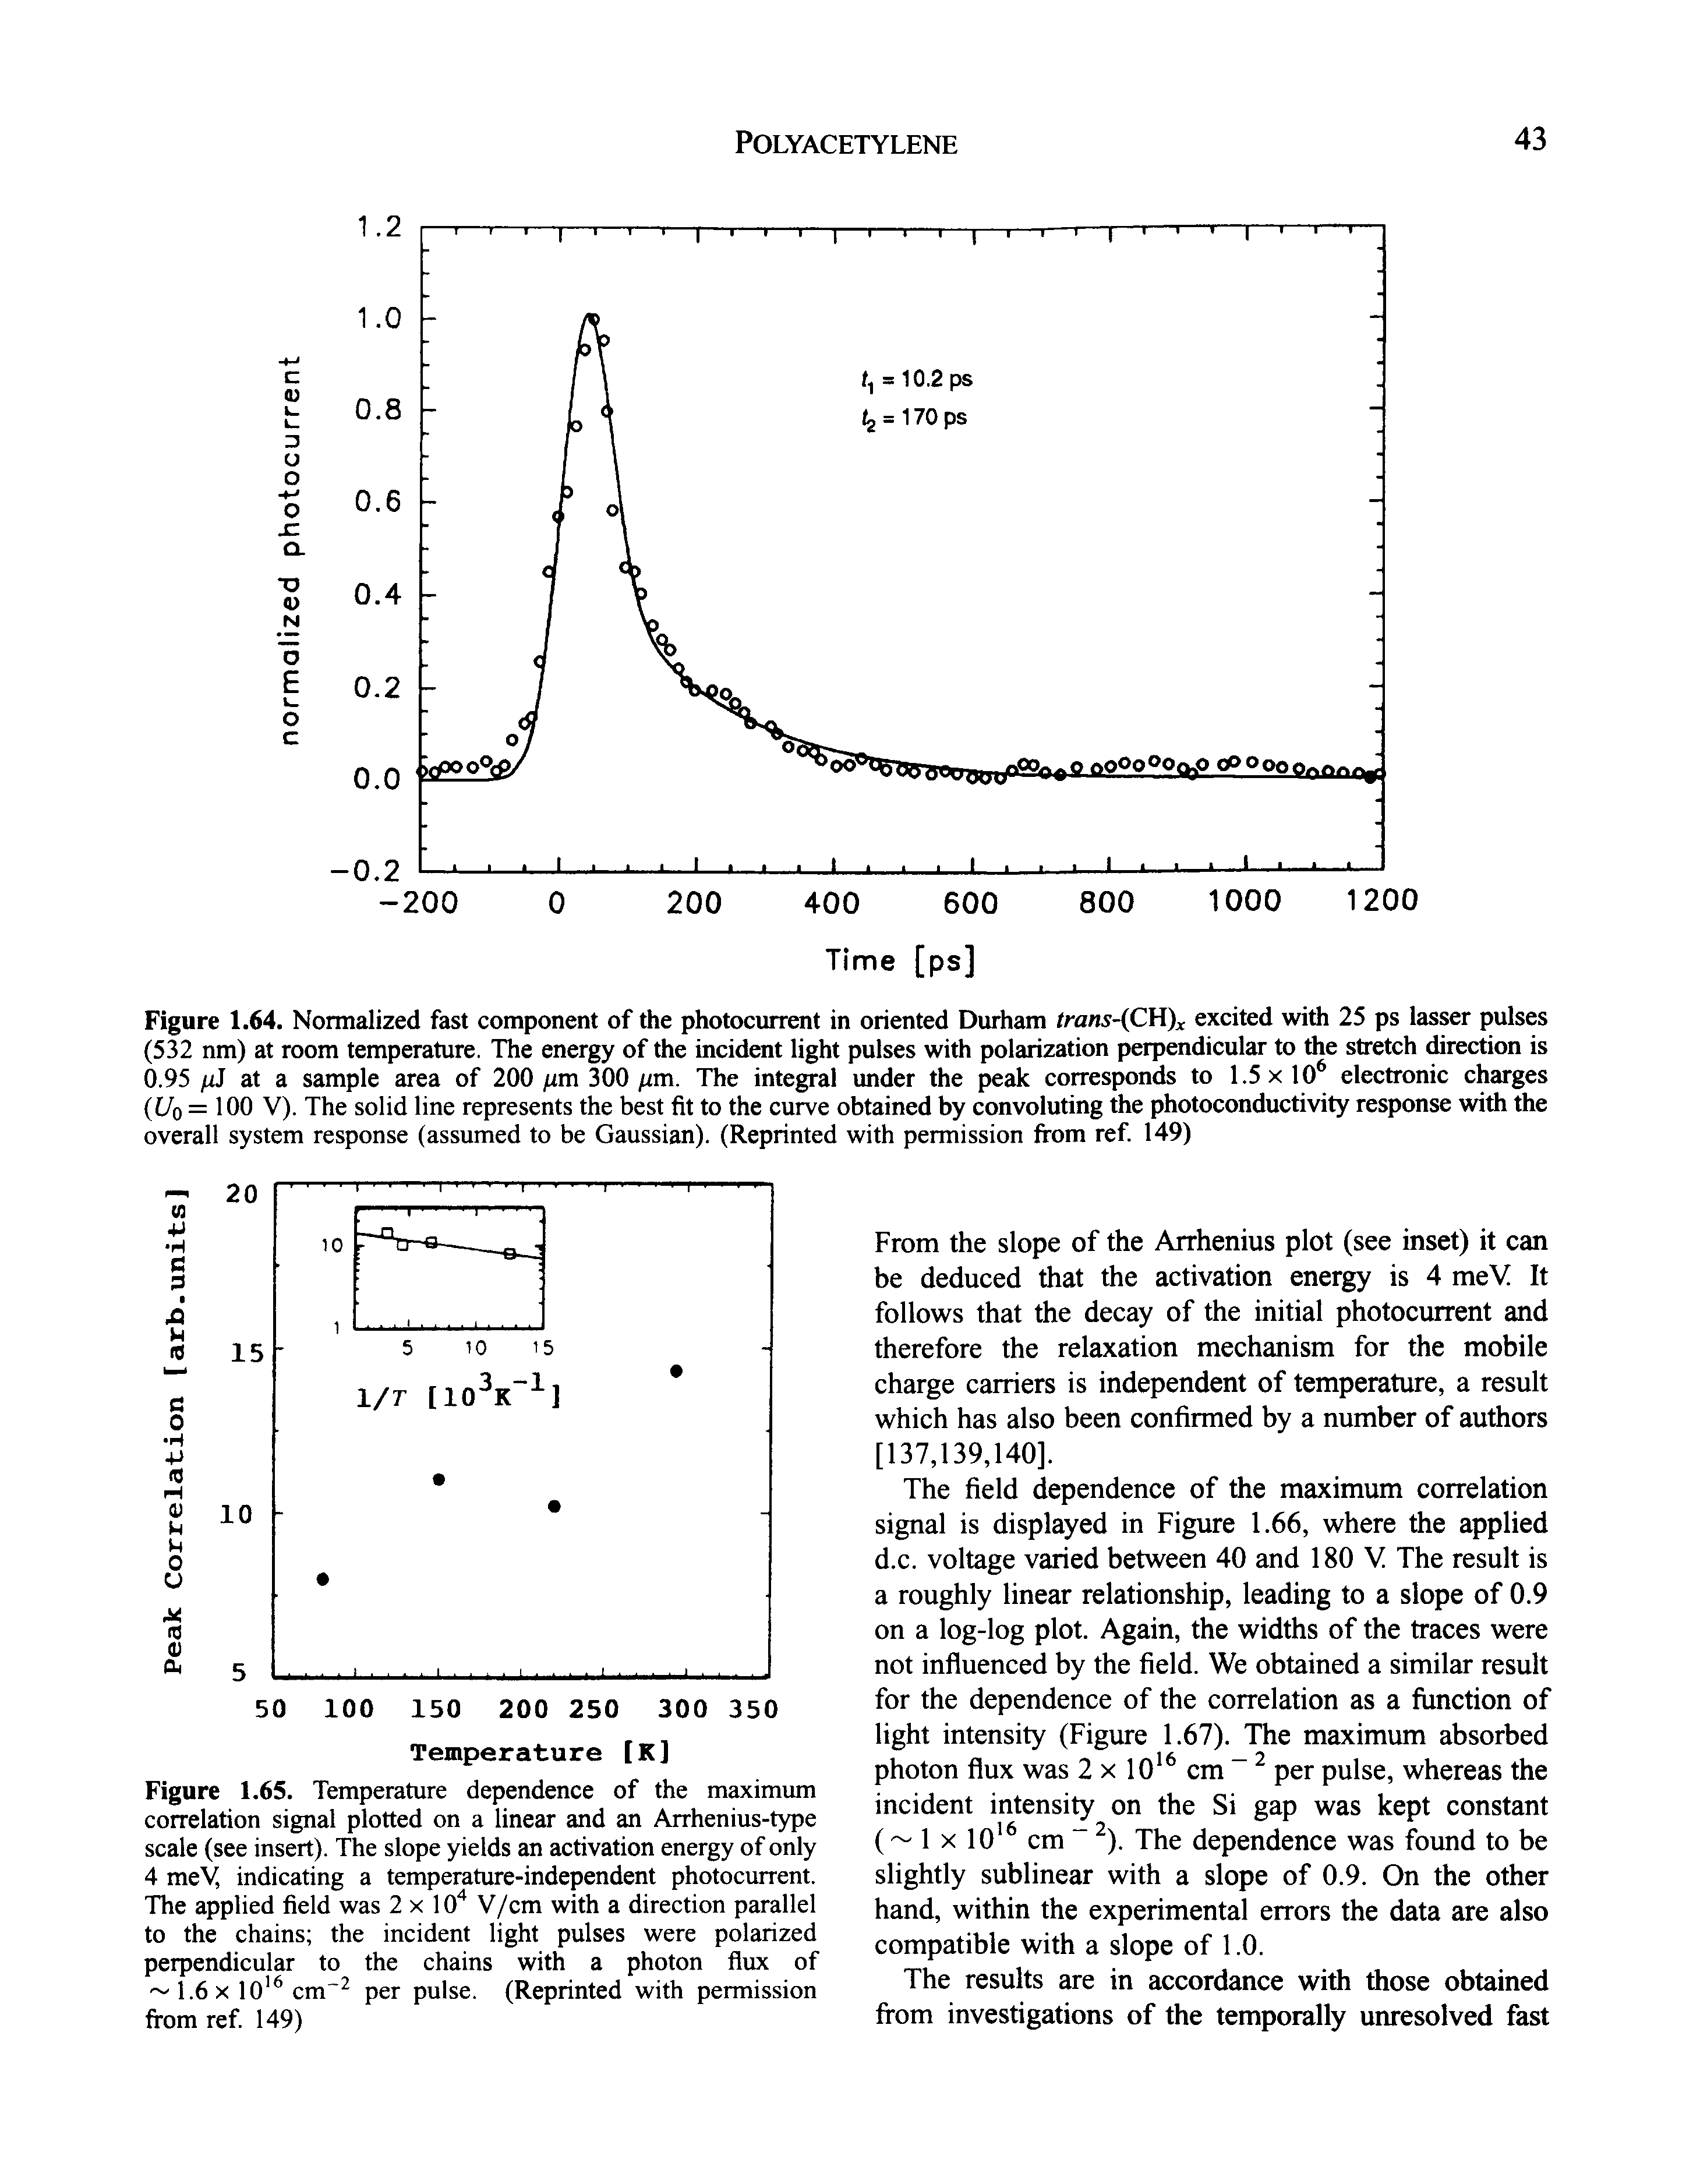 Figure 1.64. Normalized fast component of the photocurrent in oriented Omham trans- C )x excited with 25 ps lasser pulses (532 nm) at room temperature. The energy of the incident light pulses with polarization perpendicular to the stretch direction is 0.95 / J at a sample area of 200 /xm 300 /xm. The integral under the peak corresponds to 1.5 x 10 electronic charges (17o = 100 V). The solid line represents the best fit to the curve obtained by convoluting the photoconductivity response with the overall system response (assumed to be Gaussian). (Reprinted with permission from ref. 149)...